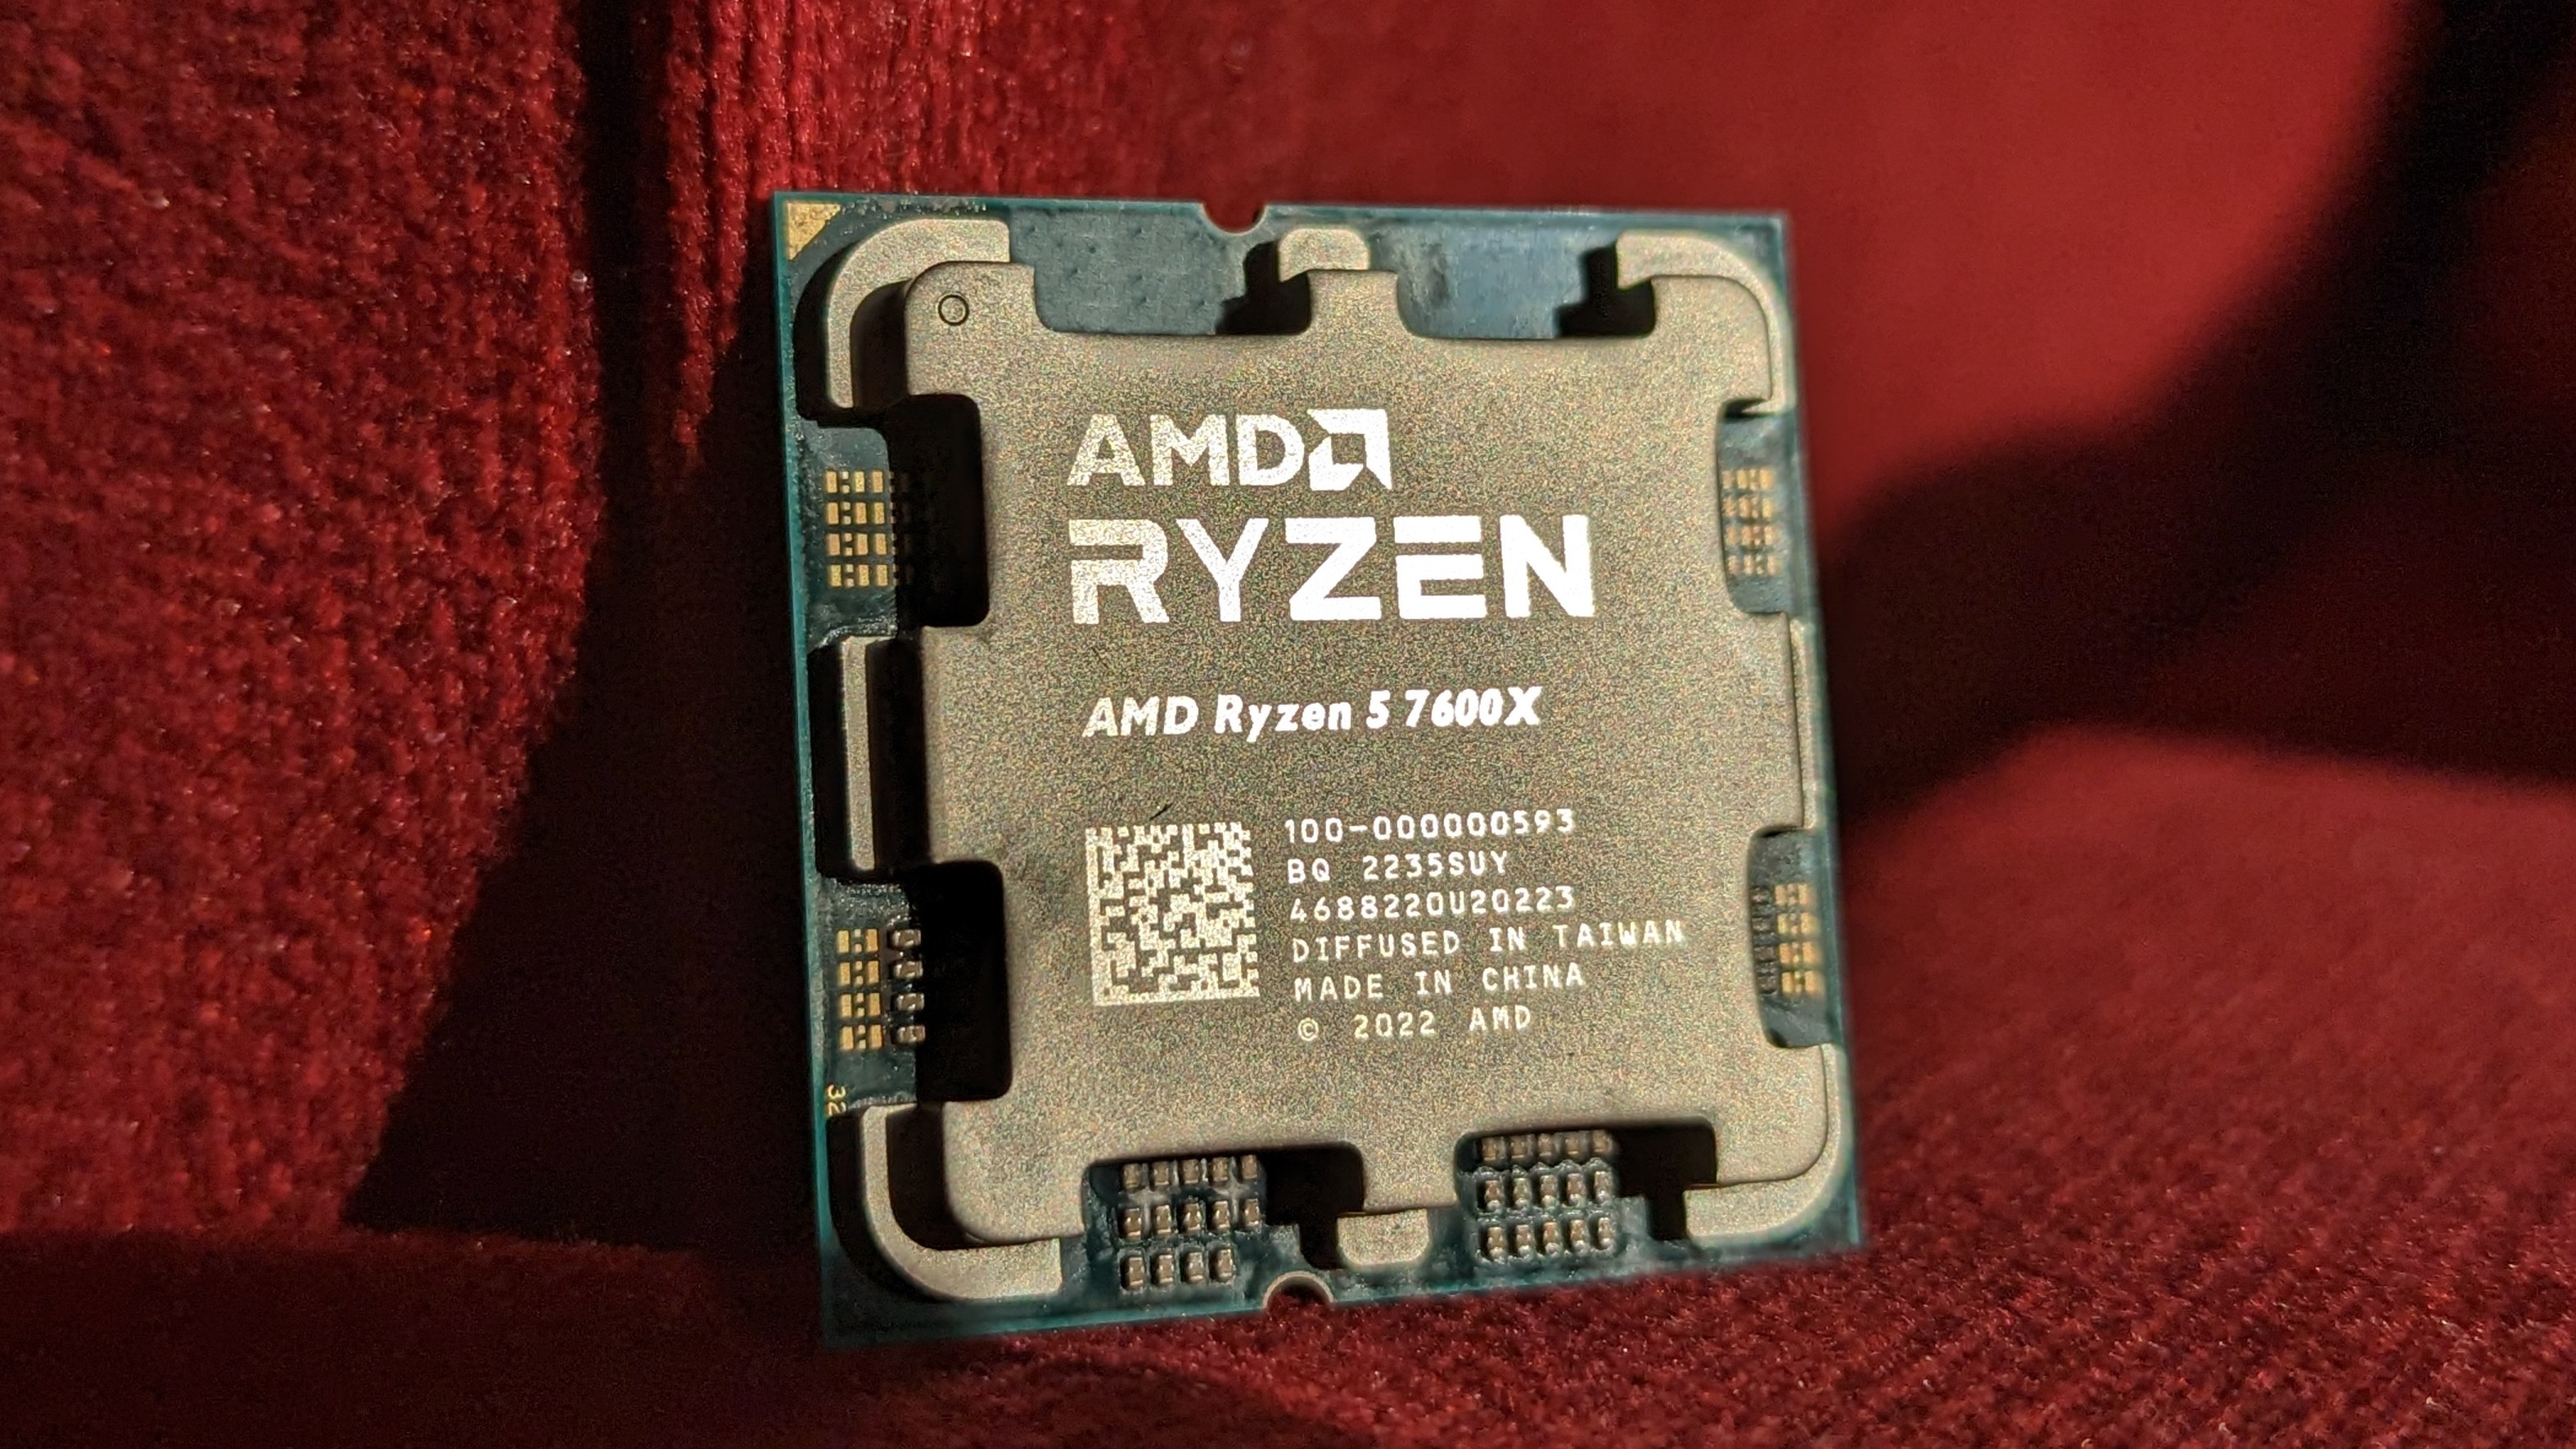 The AMD Ryzen 7600X resting against a red material